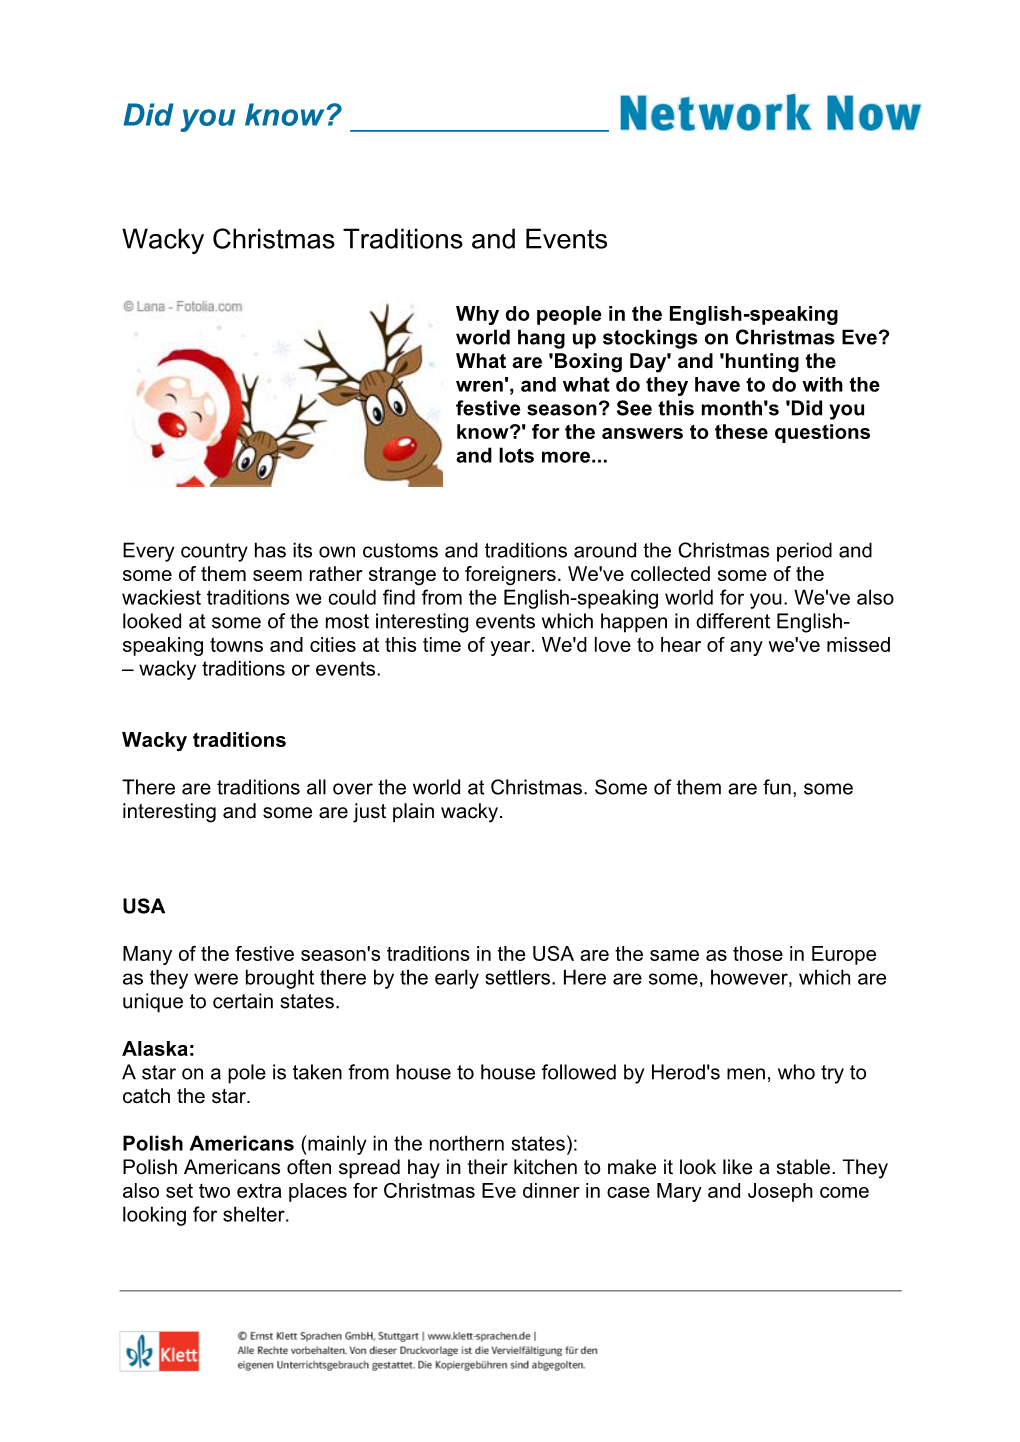 Wacky Christmas Traditions and Events